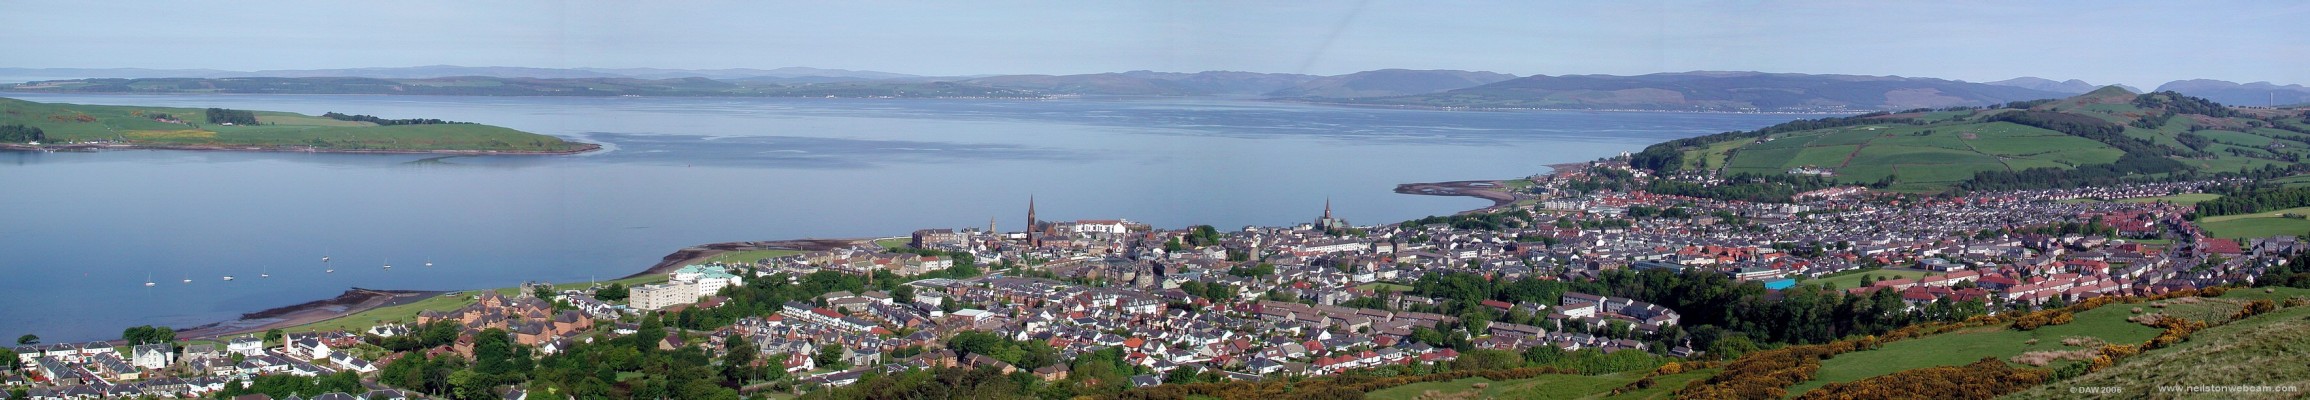 Over looking Largs from Castle Hill
A birds eye view of Largs, once a favourite place for holiday makers from Glasgow but now gets the name of God's waiting room.  Most of the large Hotels have been demolished for flats or converted into care homes.  32% of its population of 11,500 are over 60, the average for the rest of Ayrshire is 22%
